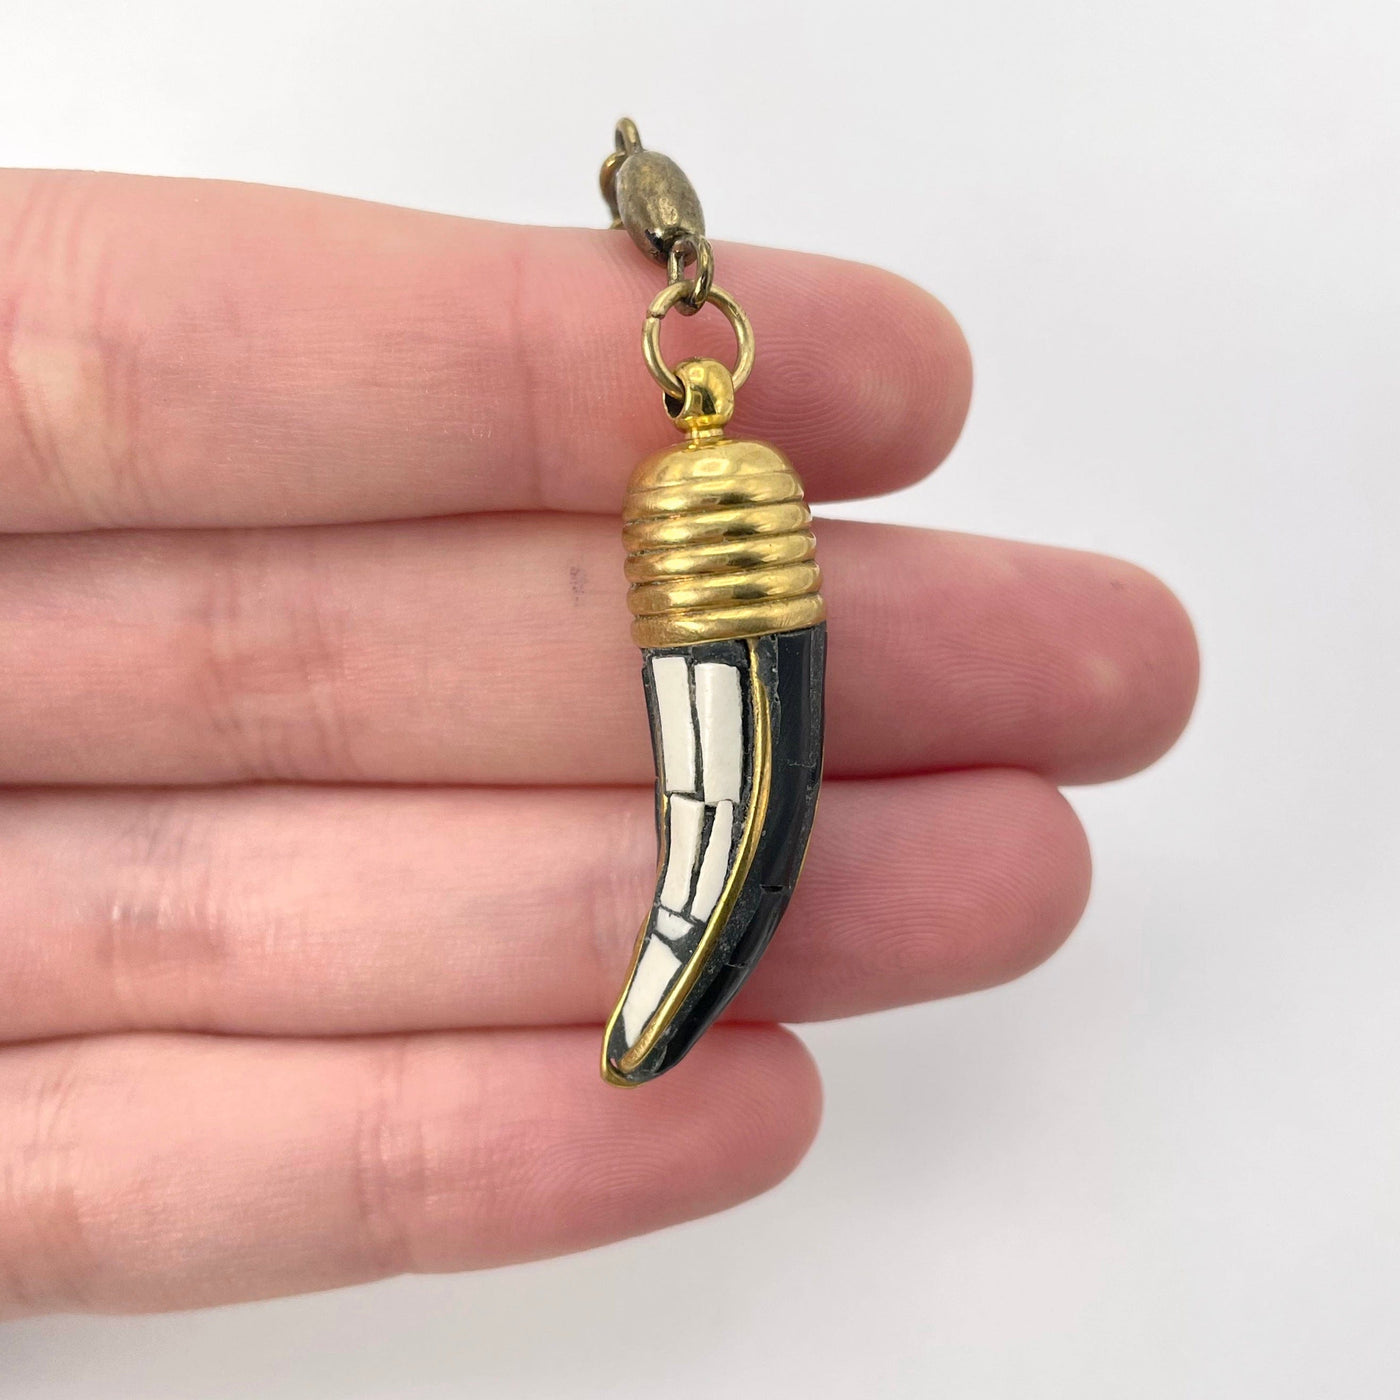 close up of black and white horn pendant in hand for size reference and details